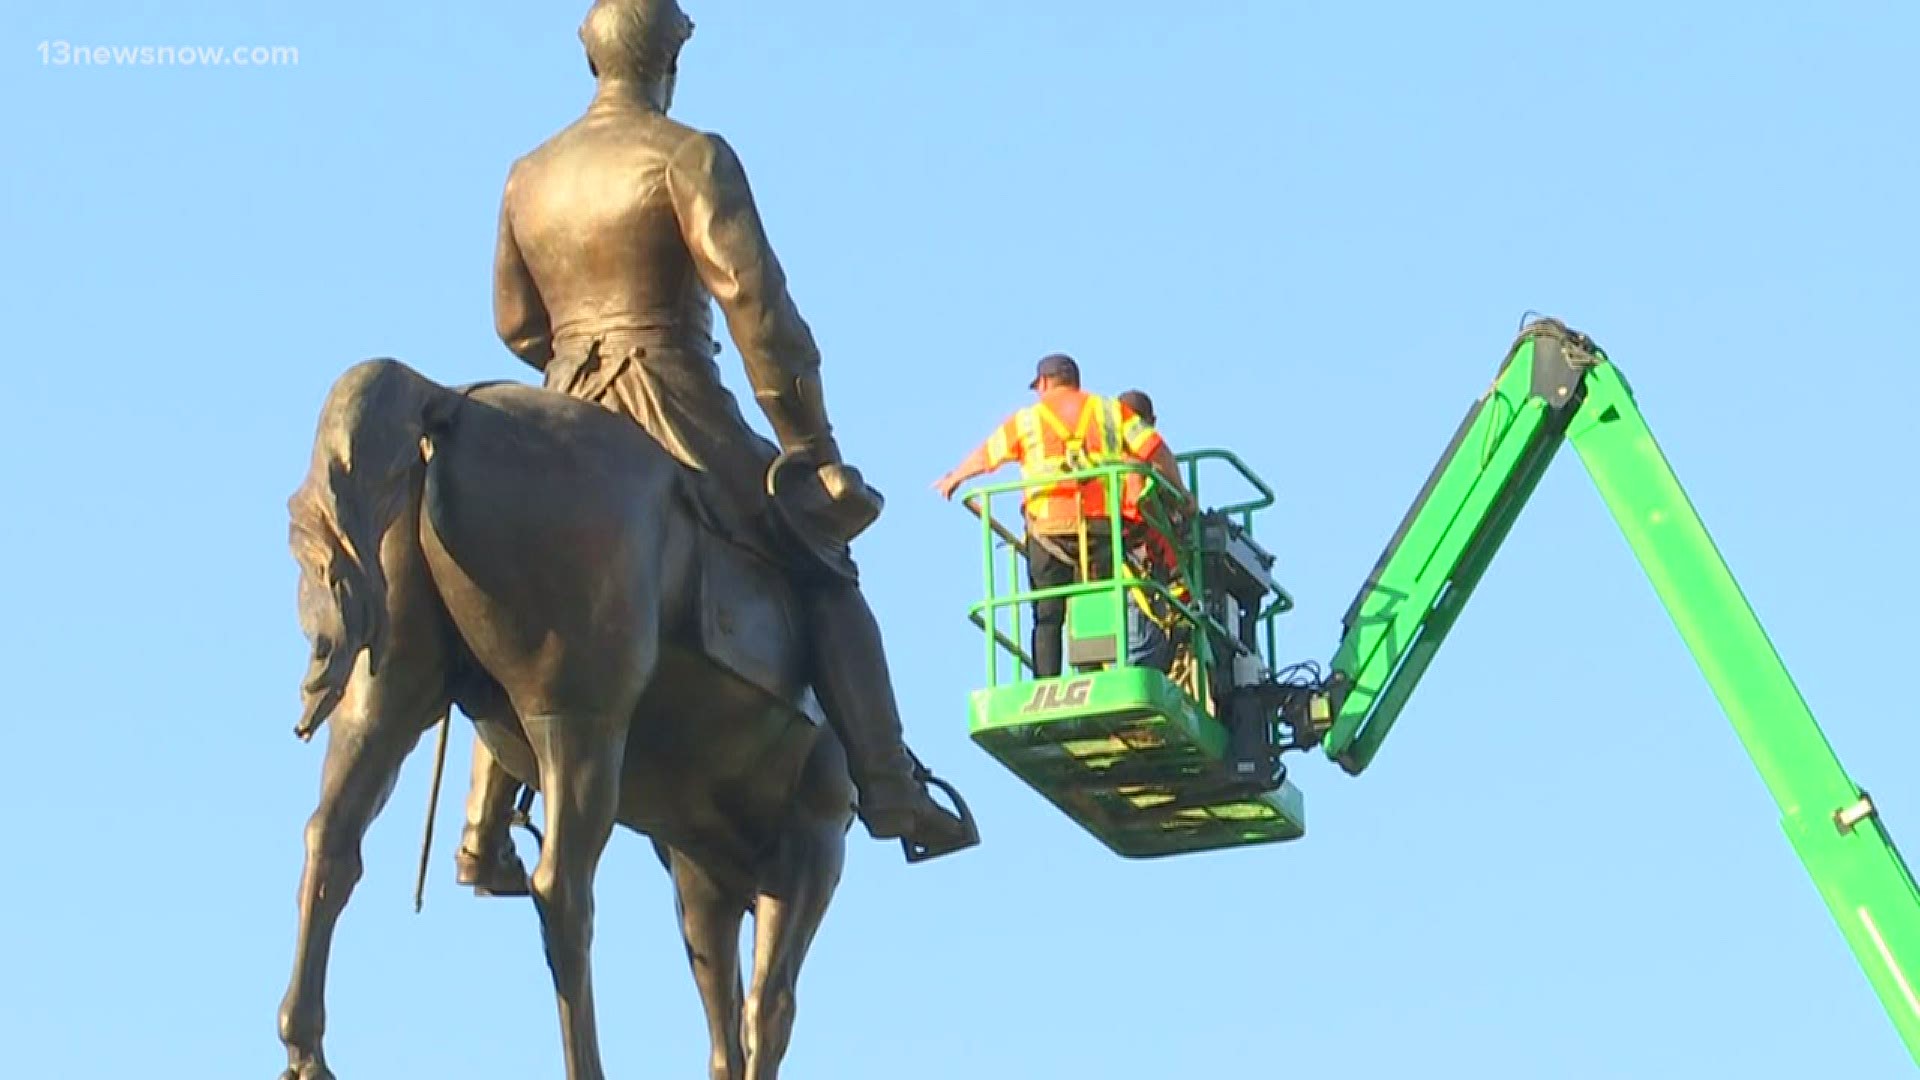 A judge has issued a 10-day injunction preventing the removal of the monument to Confederate General Robert E. Lee in Richmond, Virginia.